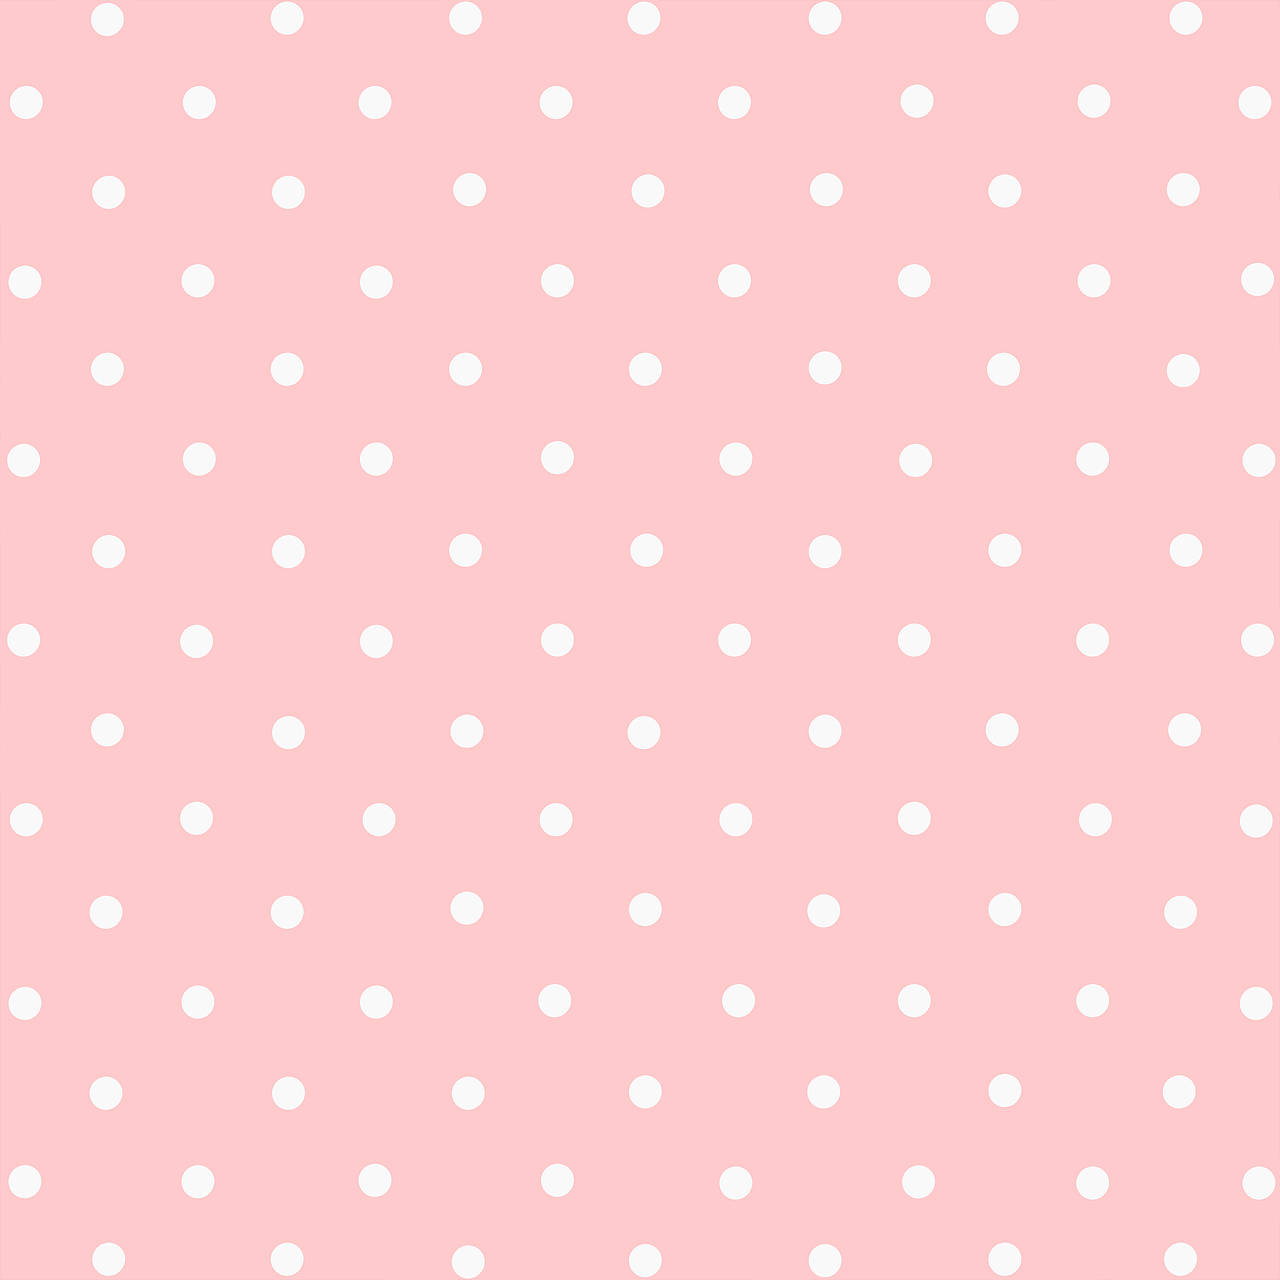 Light Pink And White Polka Dots Background